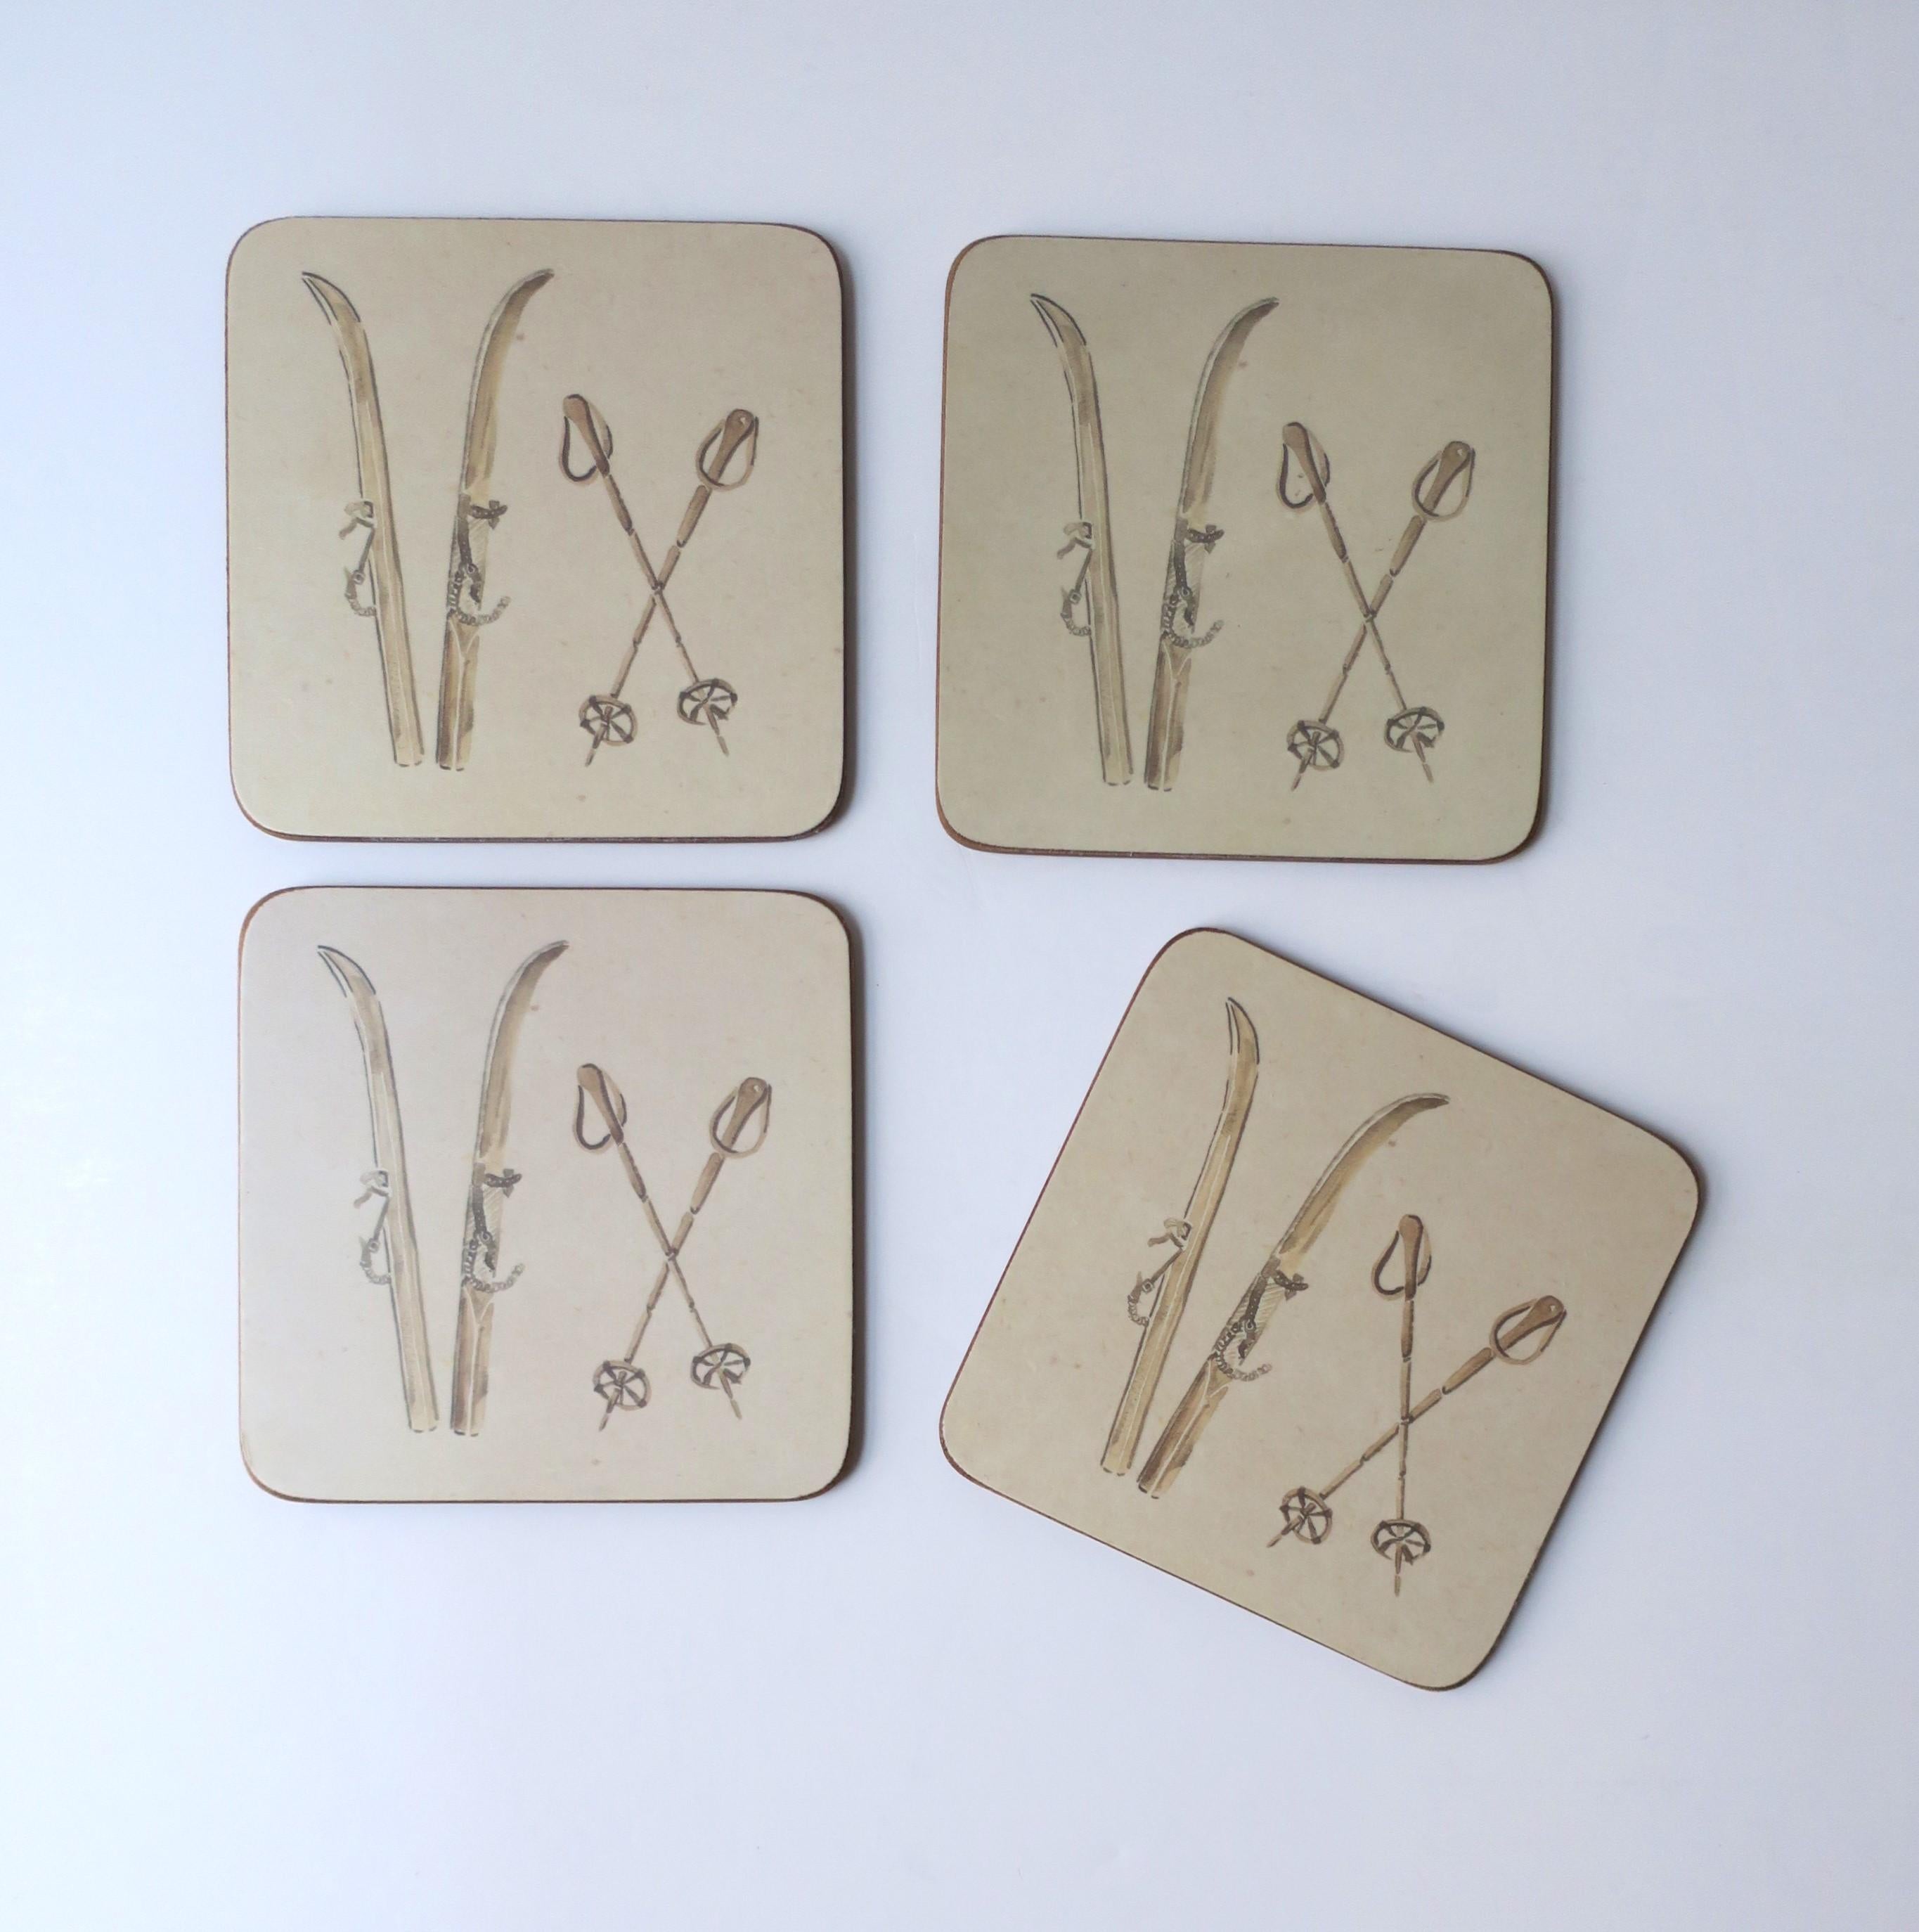 A set of four (4) alpine skier cocktail drinks coasters with cork bottom. Set depicts a rich cream neutral hue of stenciled antique skies and poles. A great set with soft round corners and protective cork bottoms. Perfect for a ski or mountain home,